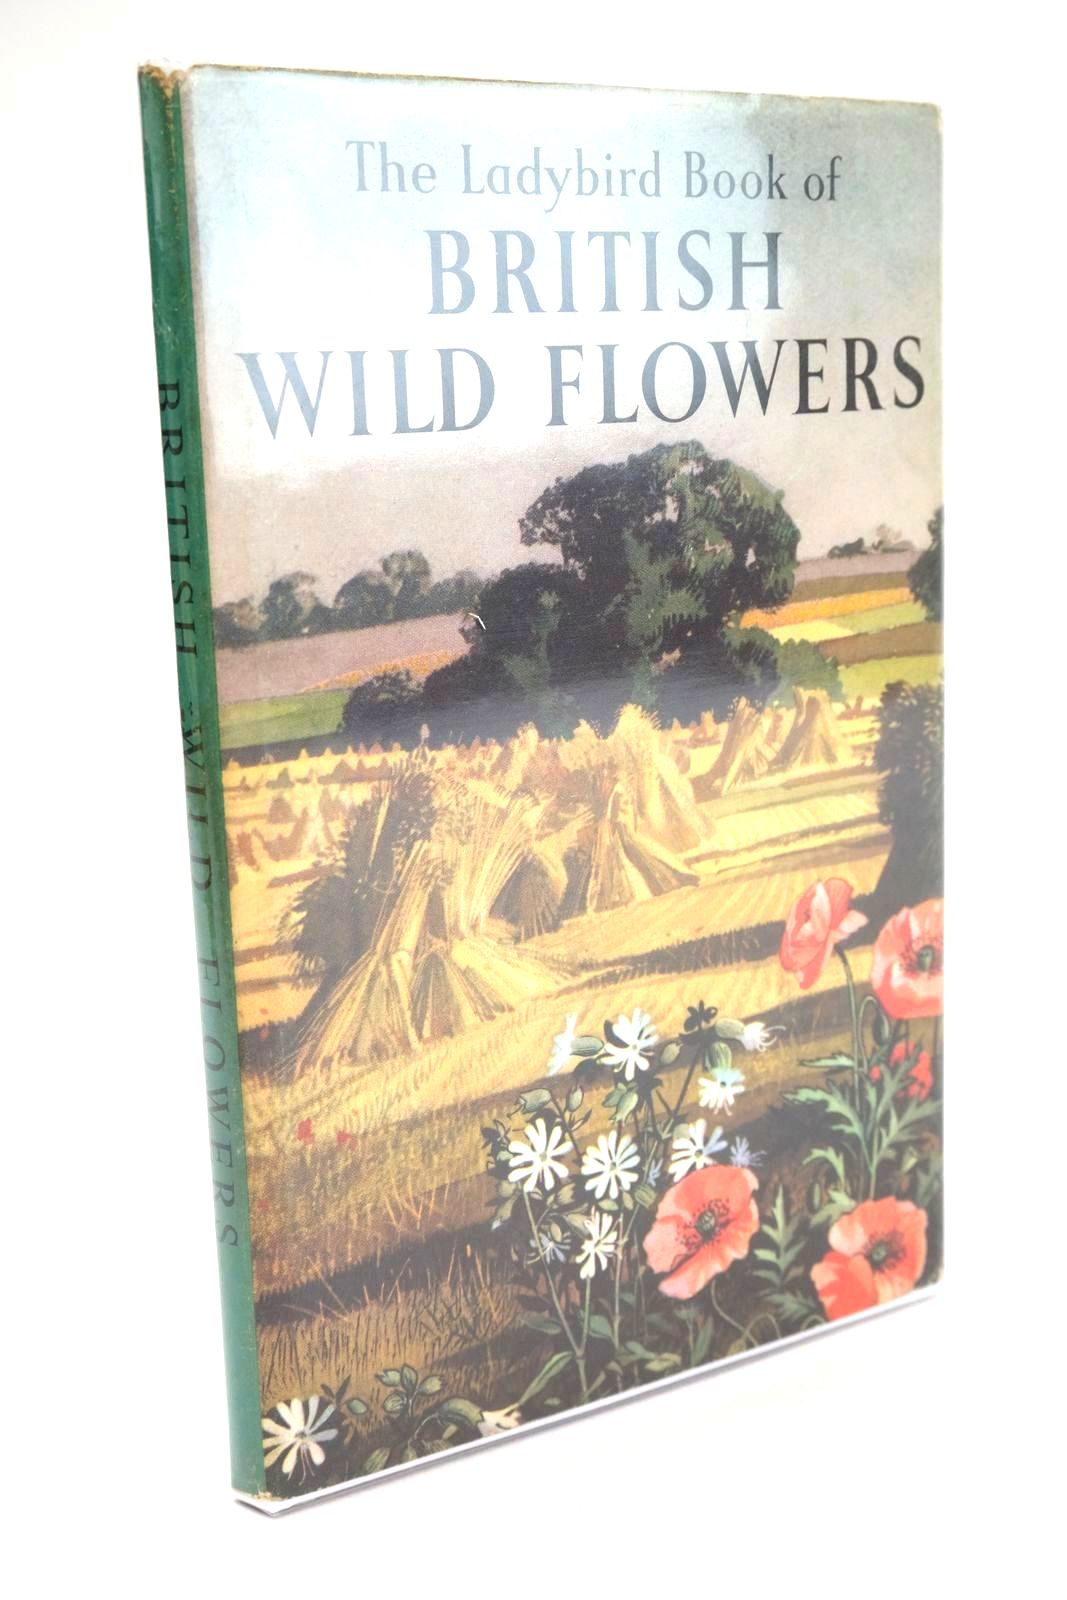 Photo of THE LADYBIRD BOOK OF BRITISH WILD FLOWERS written by Vesey-Fitzgerald, Brian illustrated by Hilder, Rowland
Hilder, Edith published by Wills & Hepworth Ltd. (STOCK CODE: 1324990)  for sale by Stella & Rose's Books